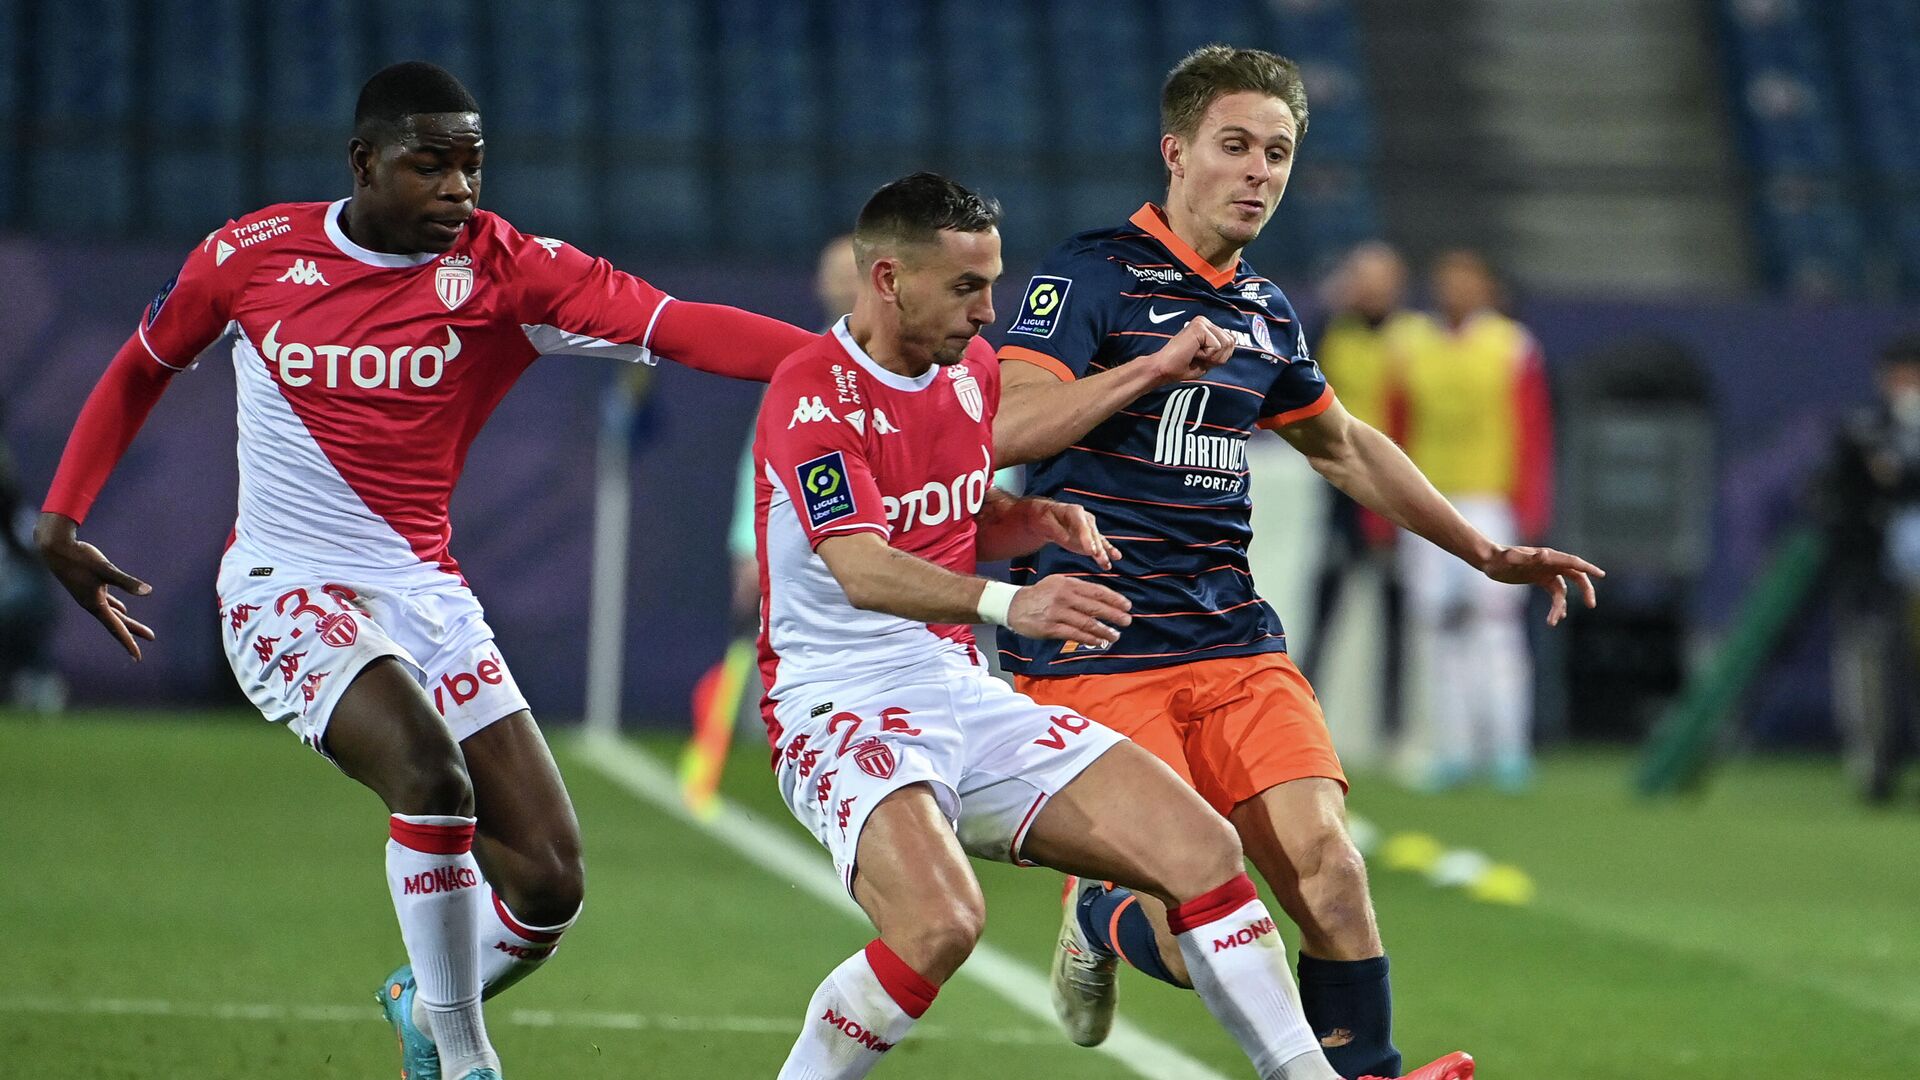 Monaco's French defender Ruben Aguilar (C) fights for the ball against Montpellier's French midfielder Joris Chotard (R) during the French L1 football match between Montpellier Herault SC and AS Monaco at Stade de la Mosson in Montpellier, southern France on on January 23, 2022. (Photo by Pascal GUYOT / AFP) - РИА Новости, 1920, 23.01.2022